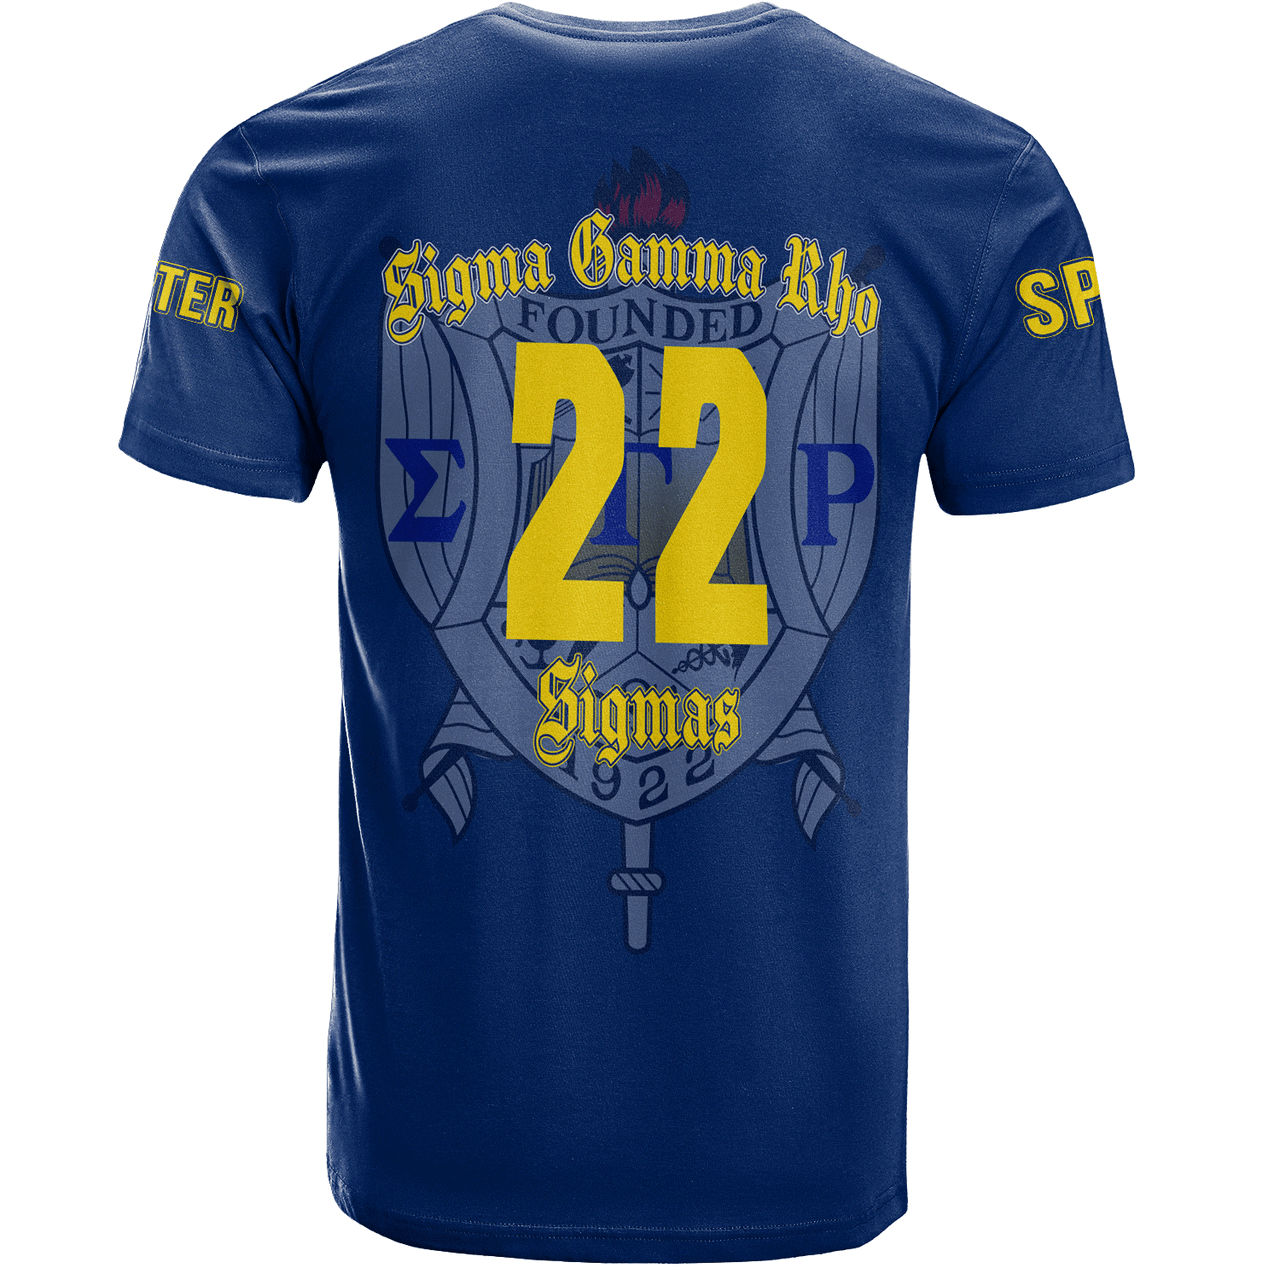 Sigma Gamma Rho T-Shirt Custom Chapter And Spring Style